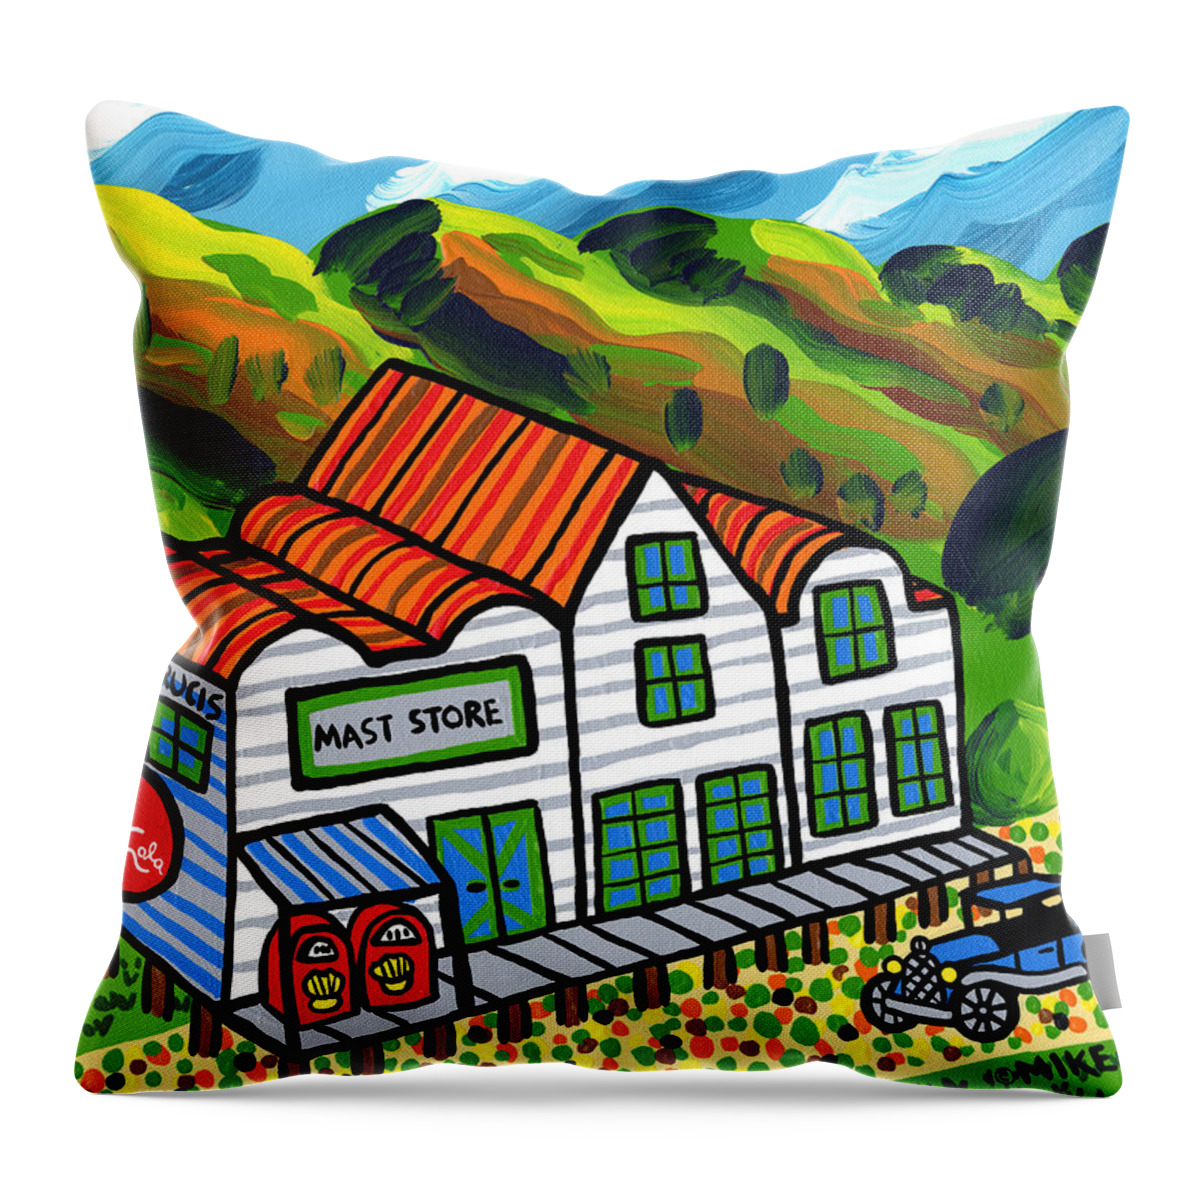 Mast Store Throw Pillow featuring the painting Mast Store Valle Crucis North Carolina by Mike Segal